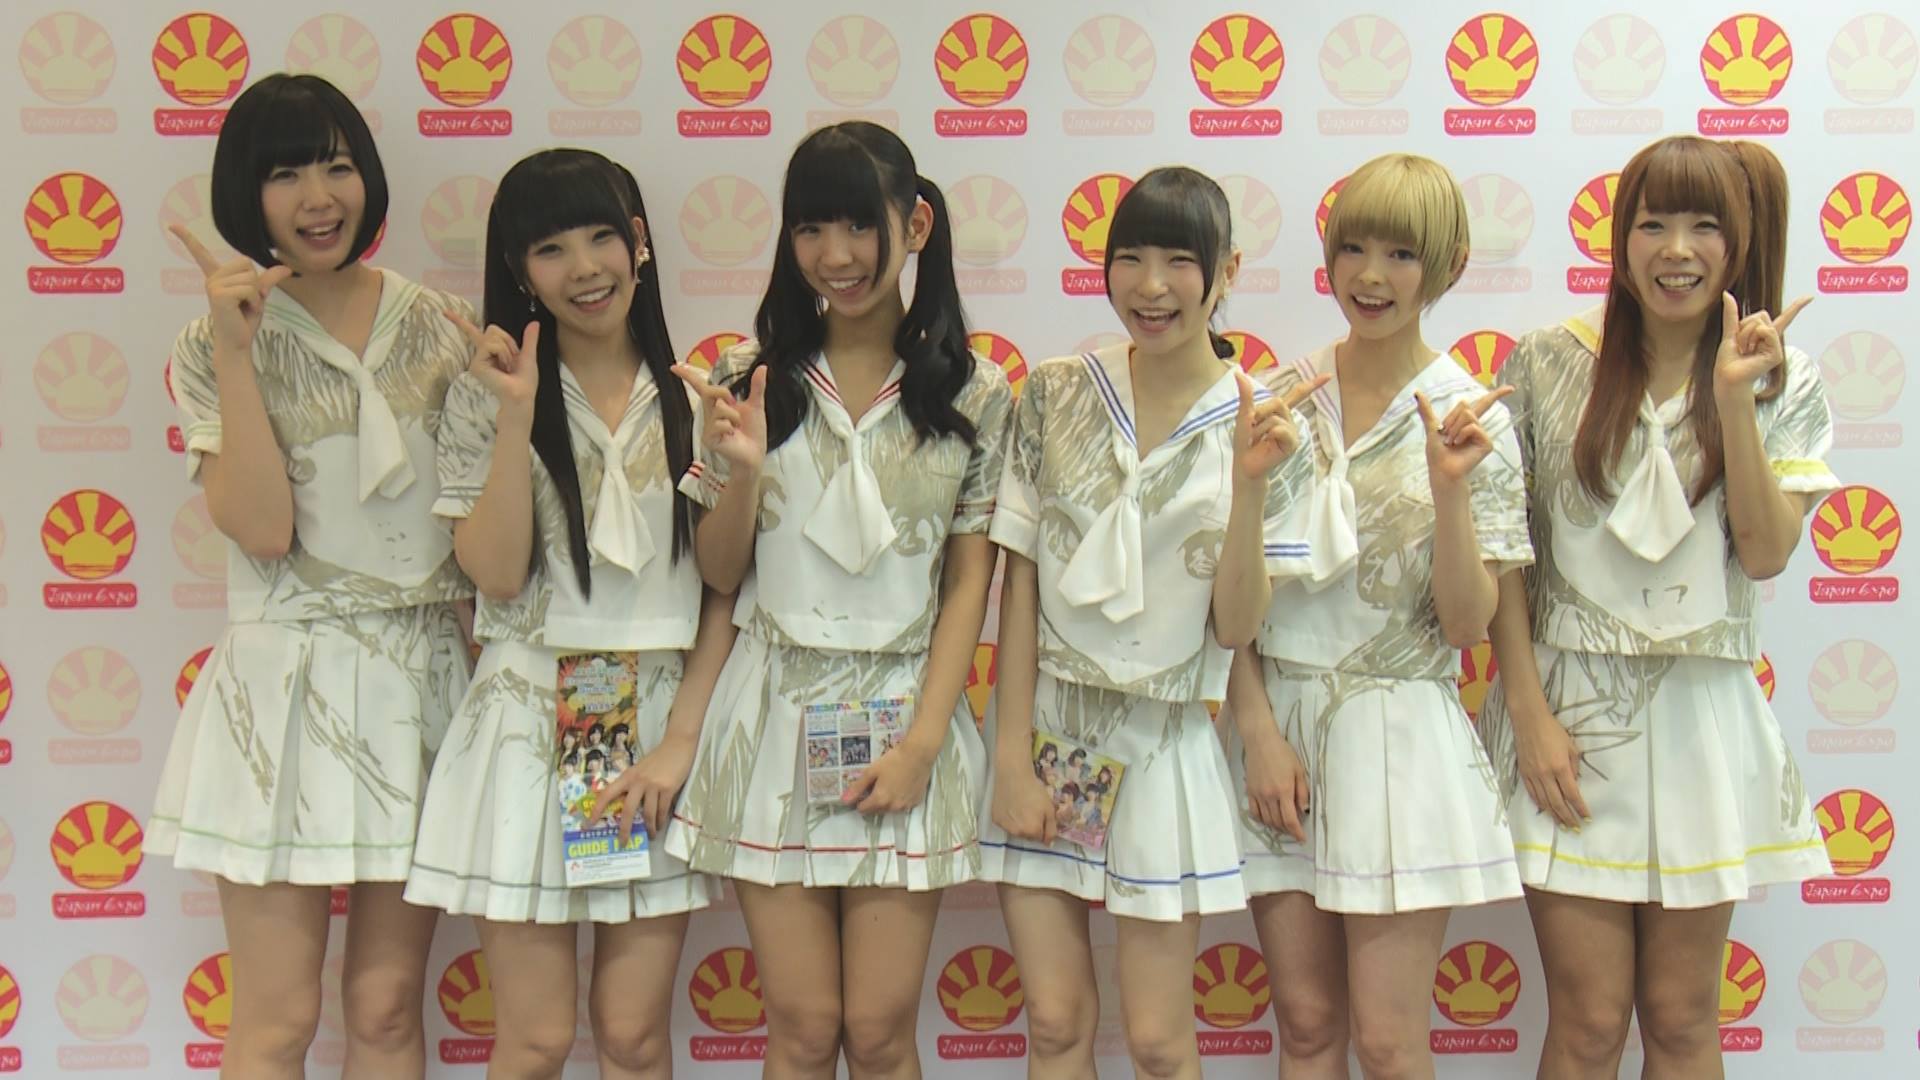 Comment Video from Dempagumi.inc at Japan Expo 2015!